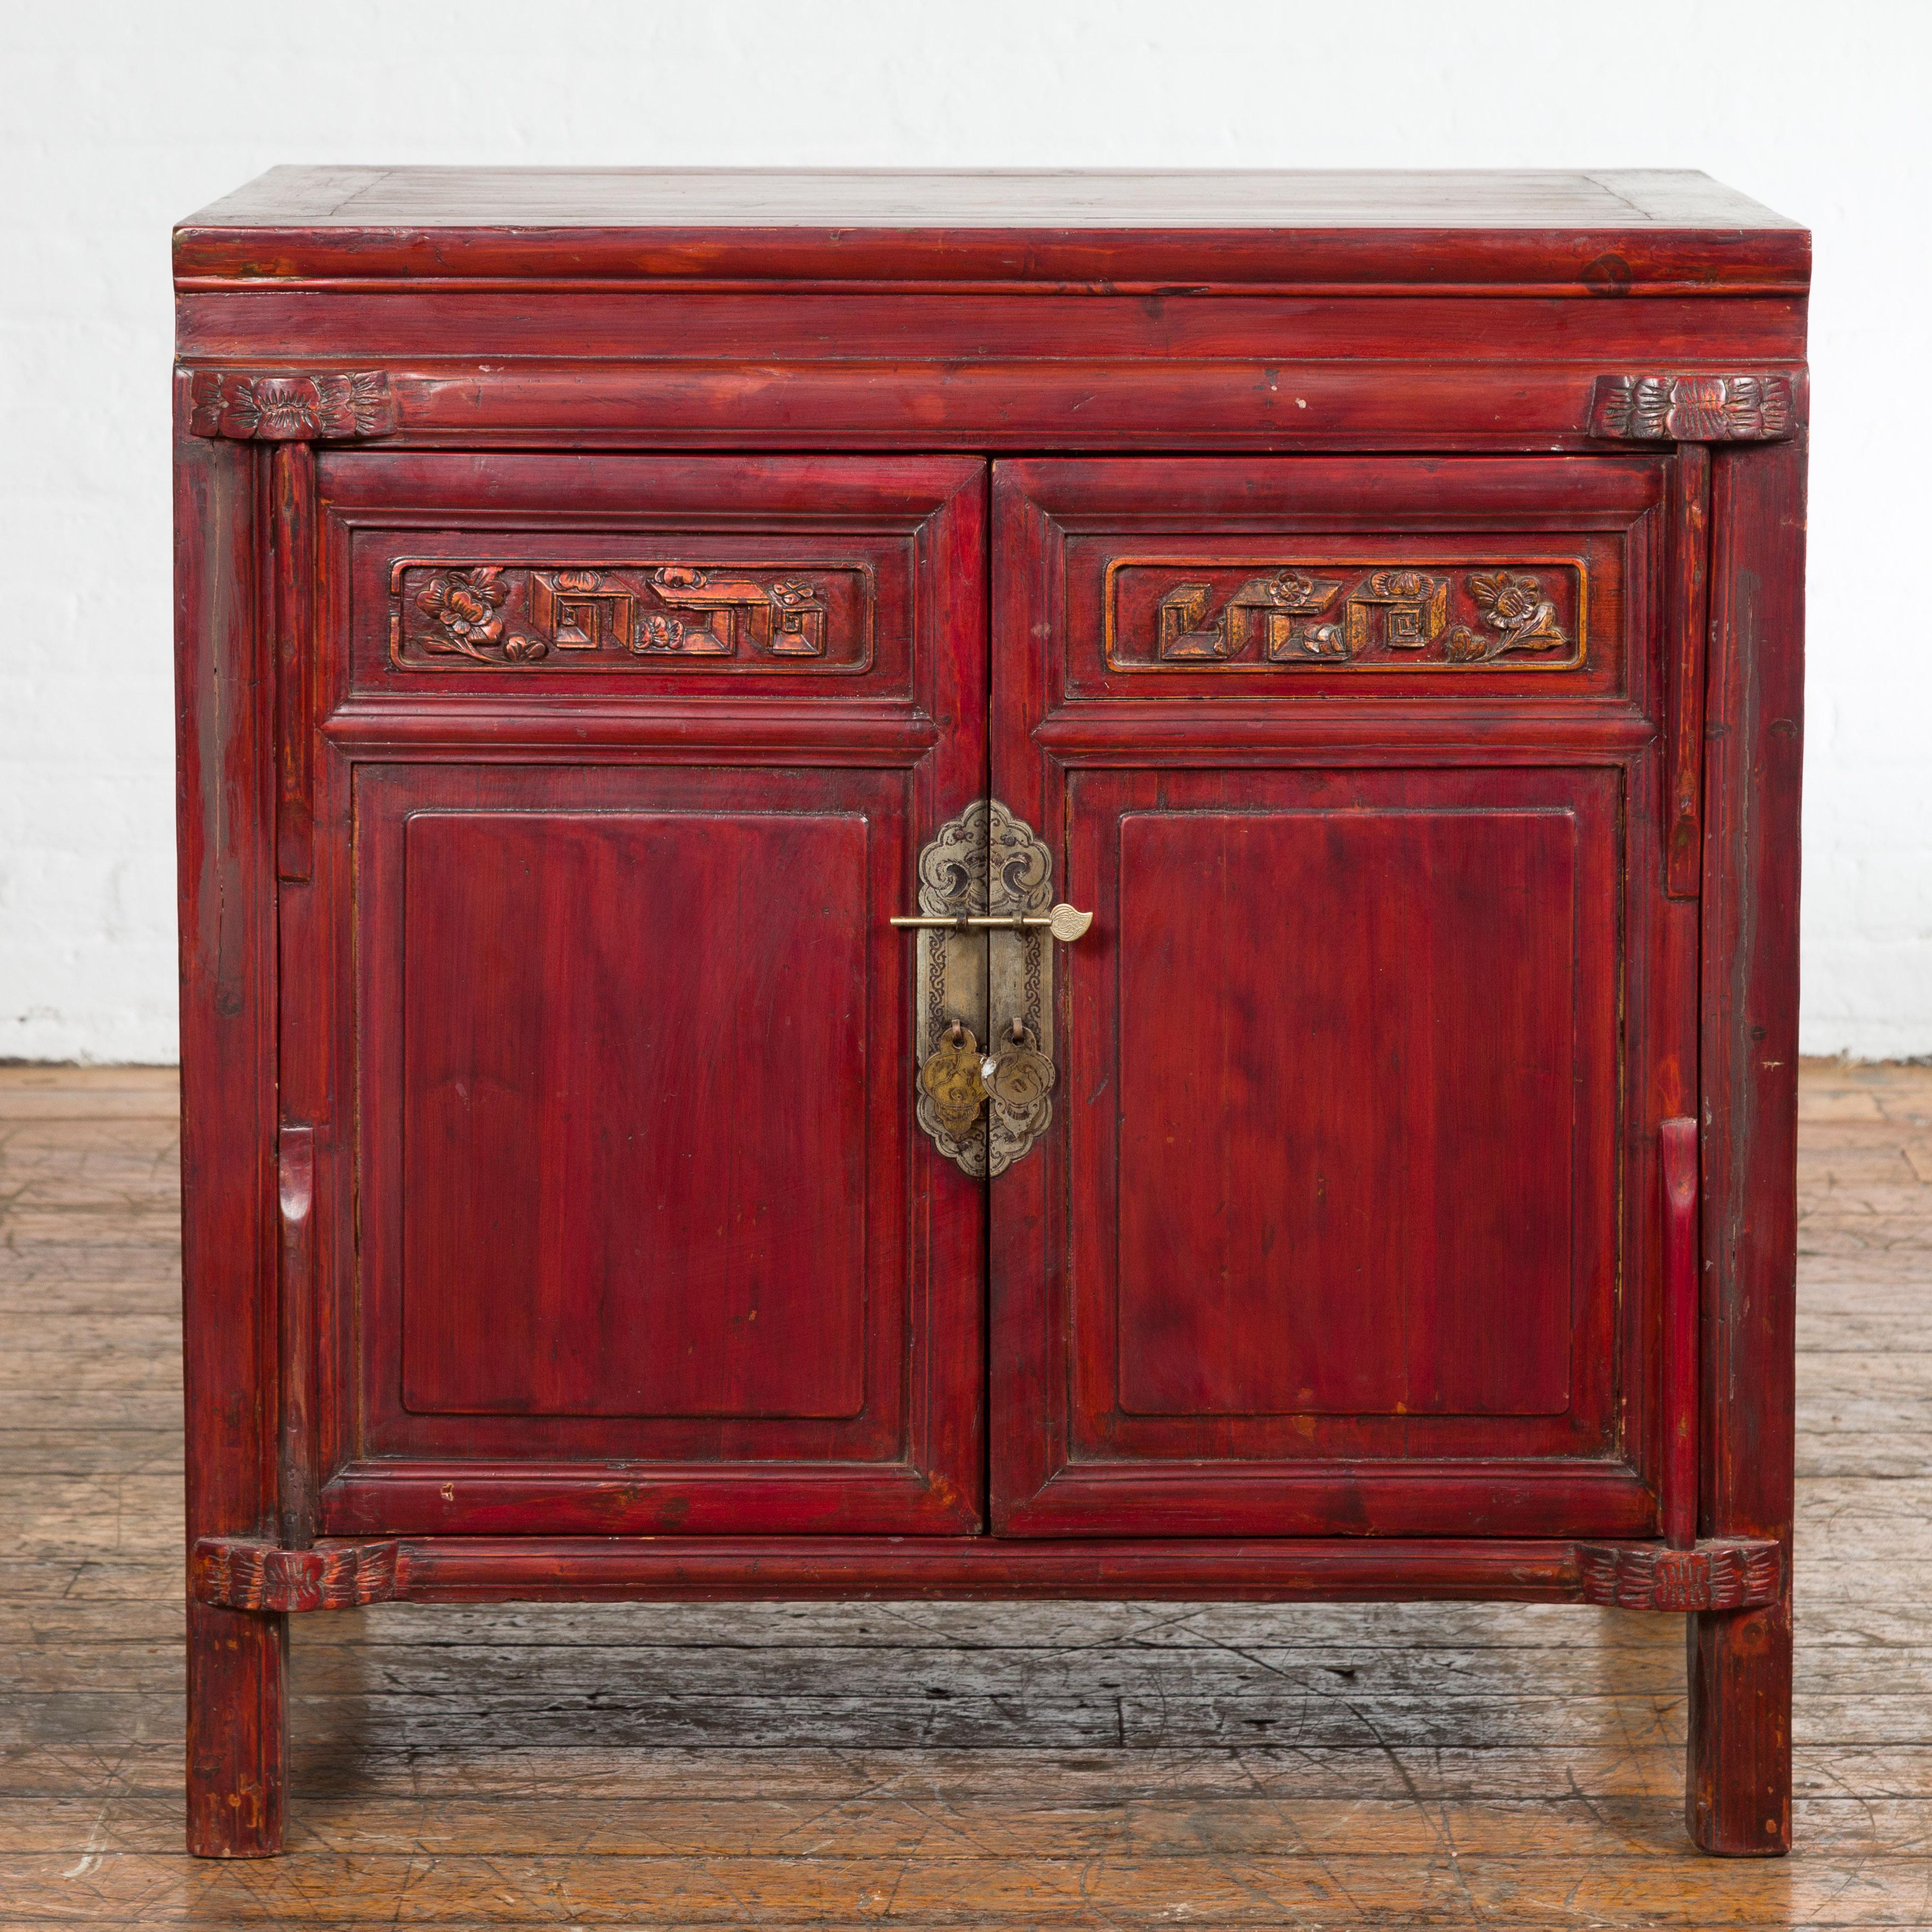 A Chinese late Qing Dynasty period bedside cabinet from the early 20th century, with red lacquer, two doors, hidden drawers, carved décor and brass hardware. Created in China during the late Qing Dynasty period in the early years of the 20th